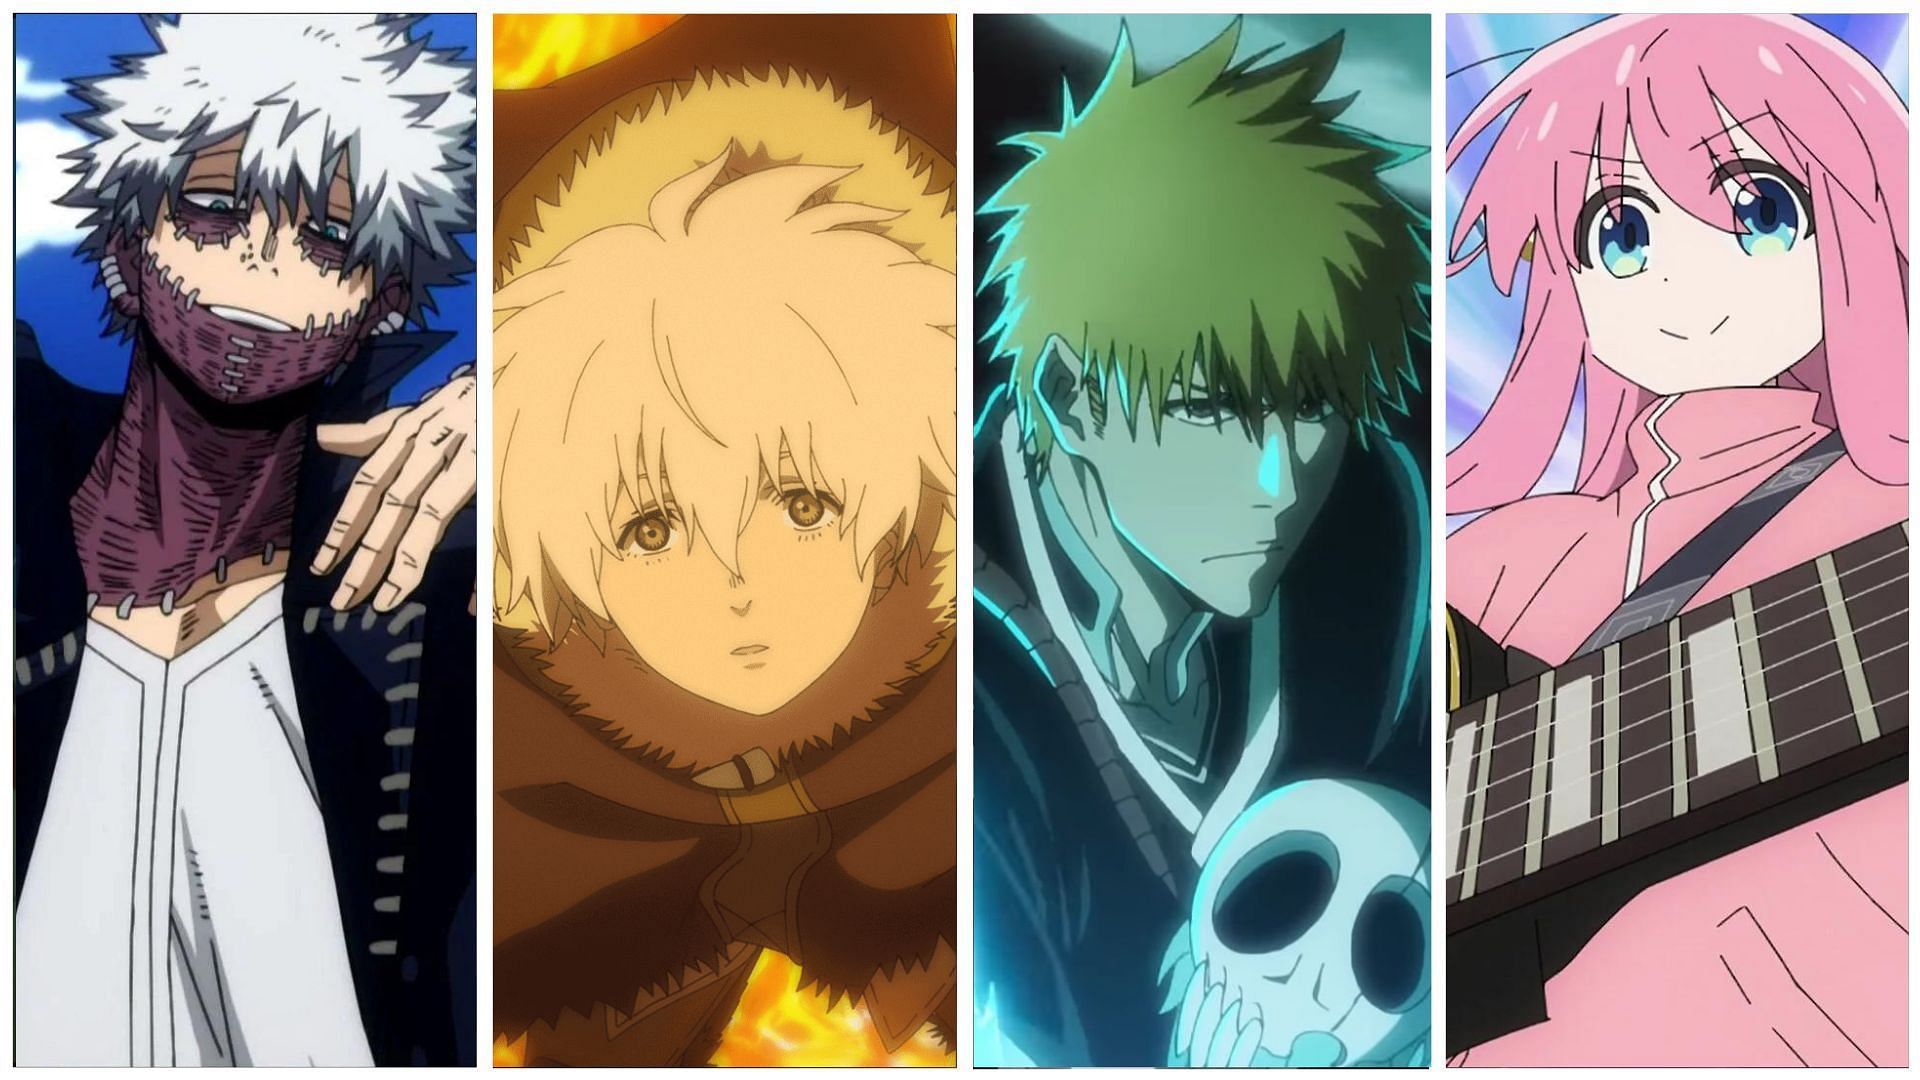 Fall 2022 Anime & Where To Watch Them Online Legally | Yatta-Tachi